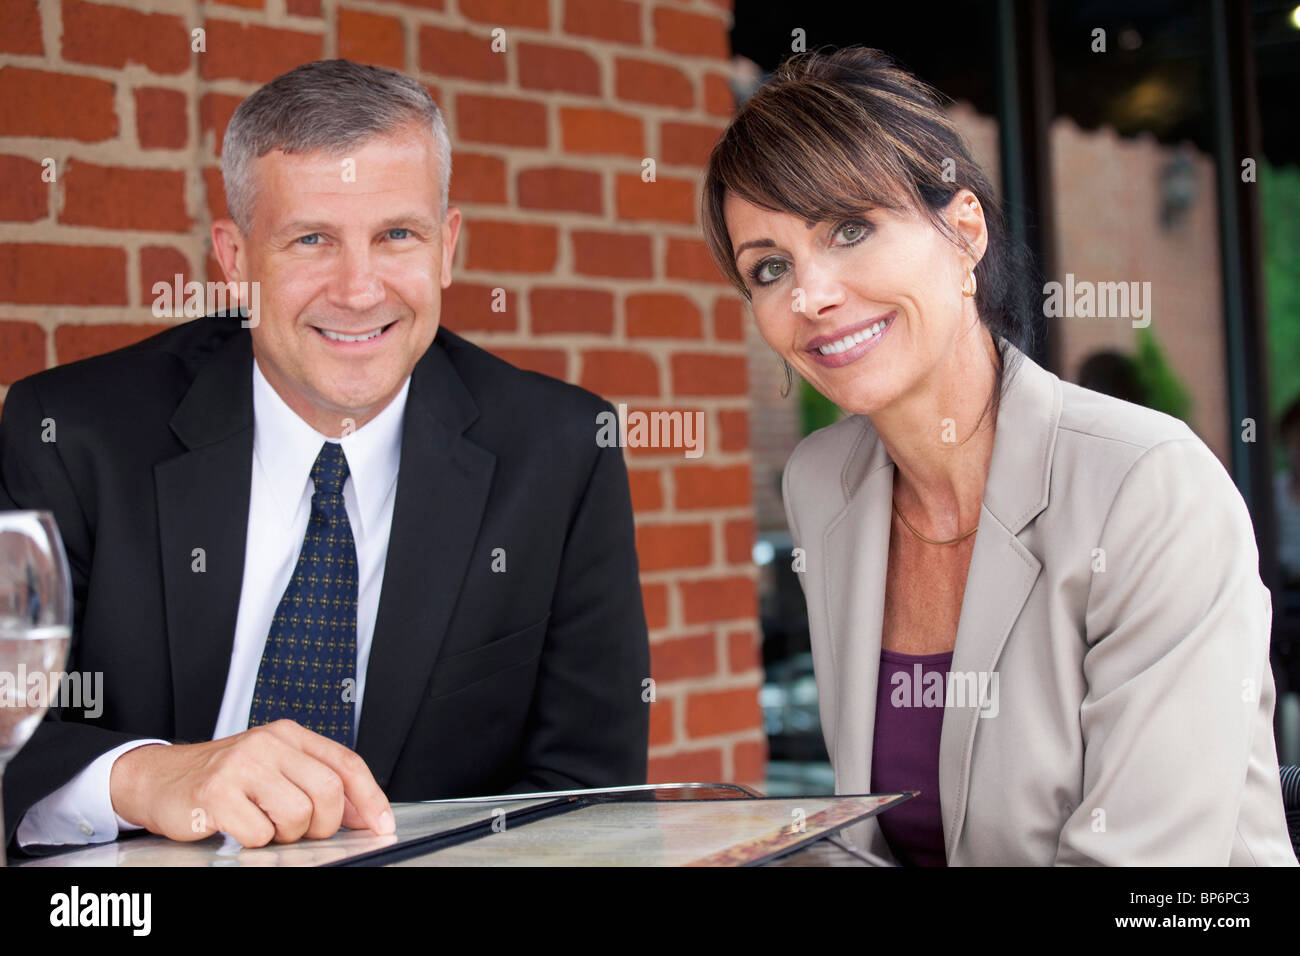 Portrait of two business people at a restaurant Stock Photo